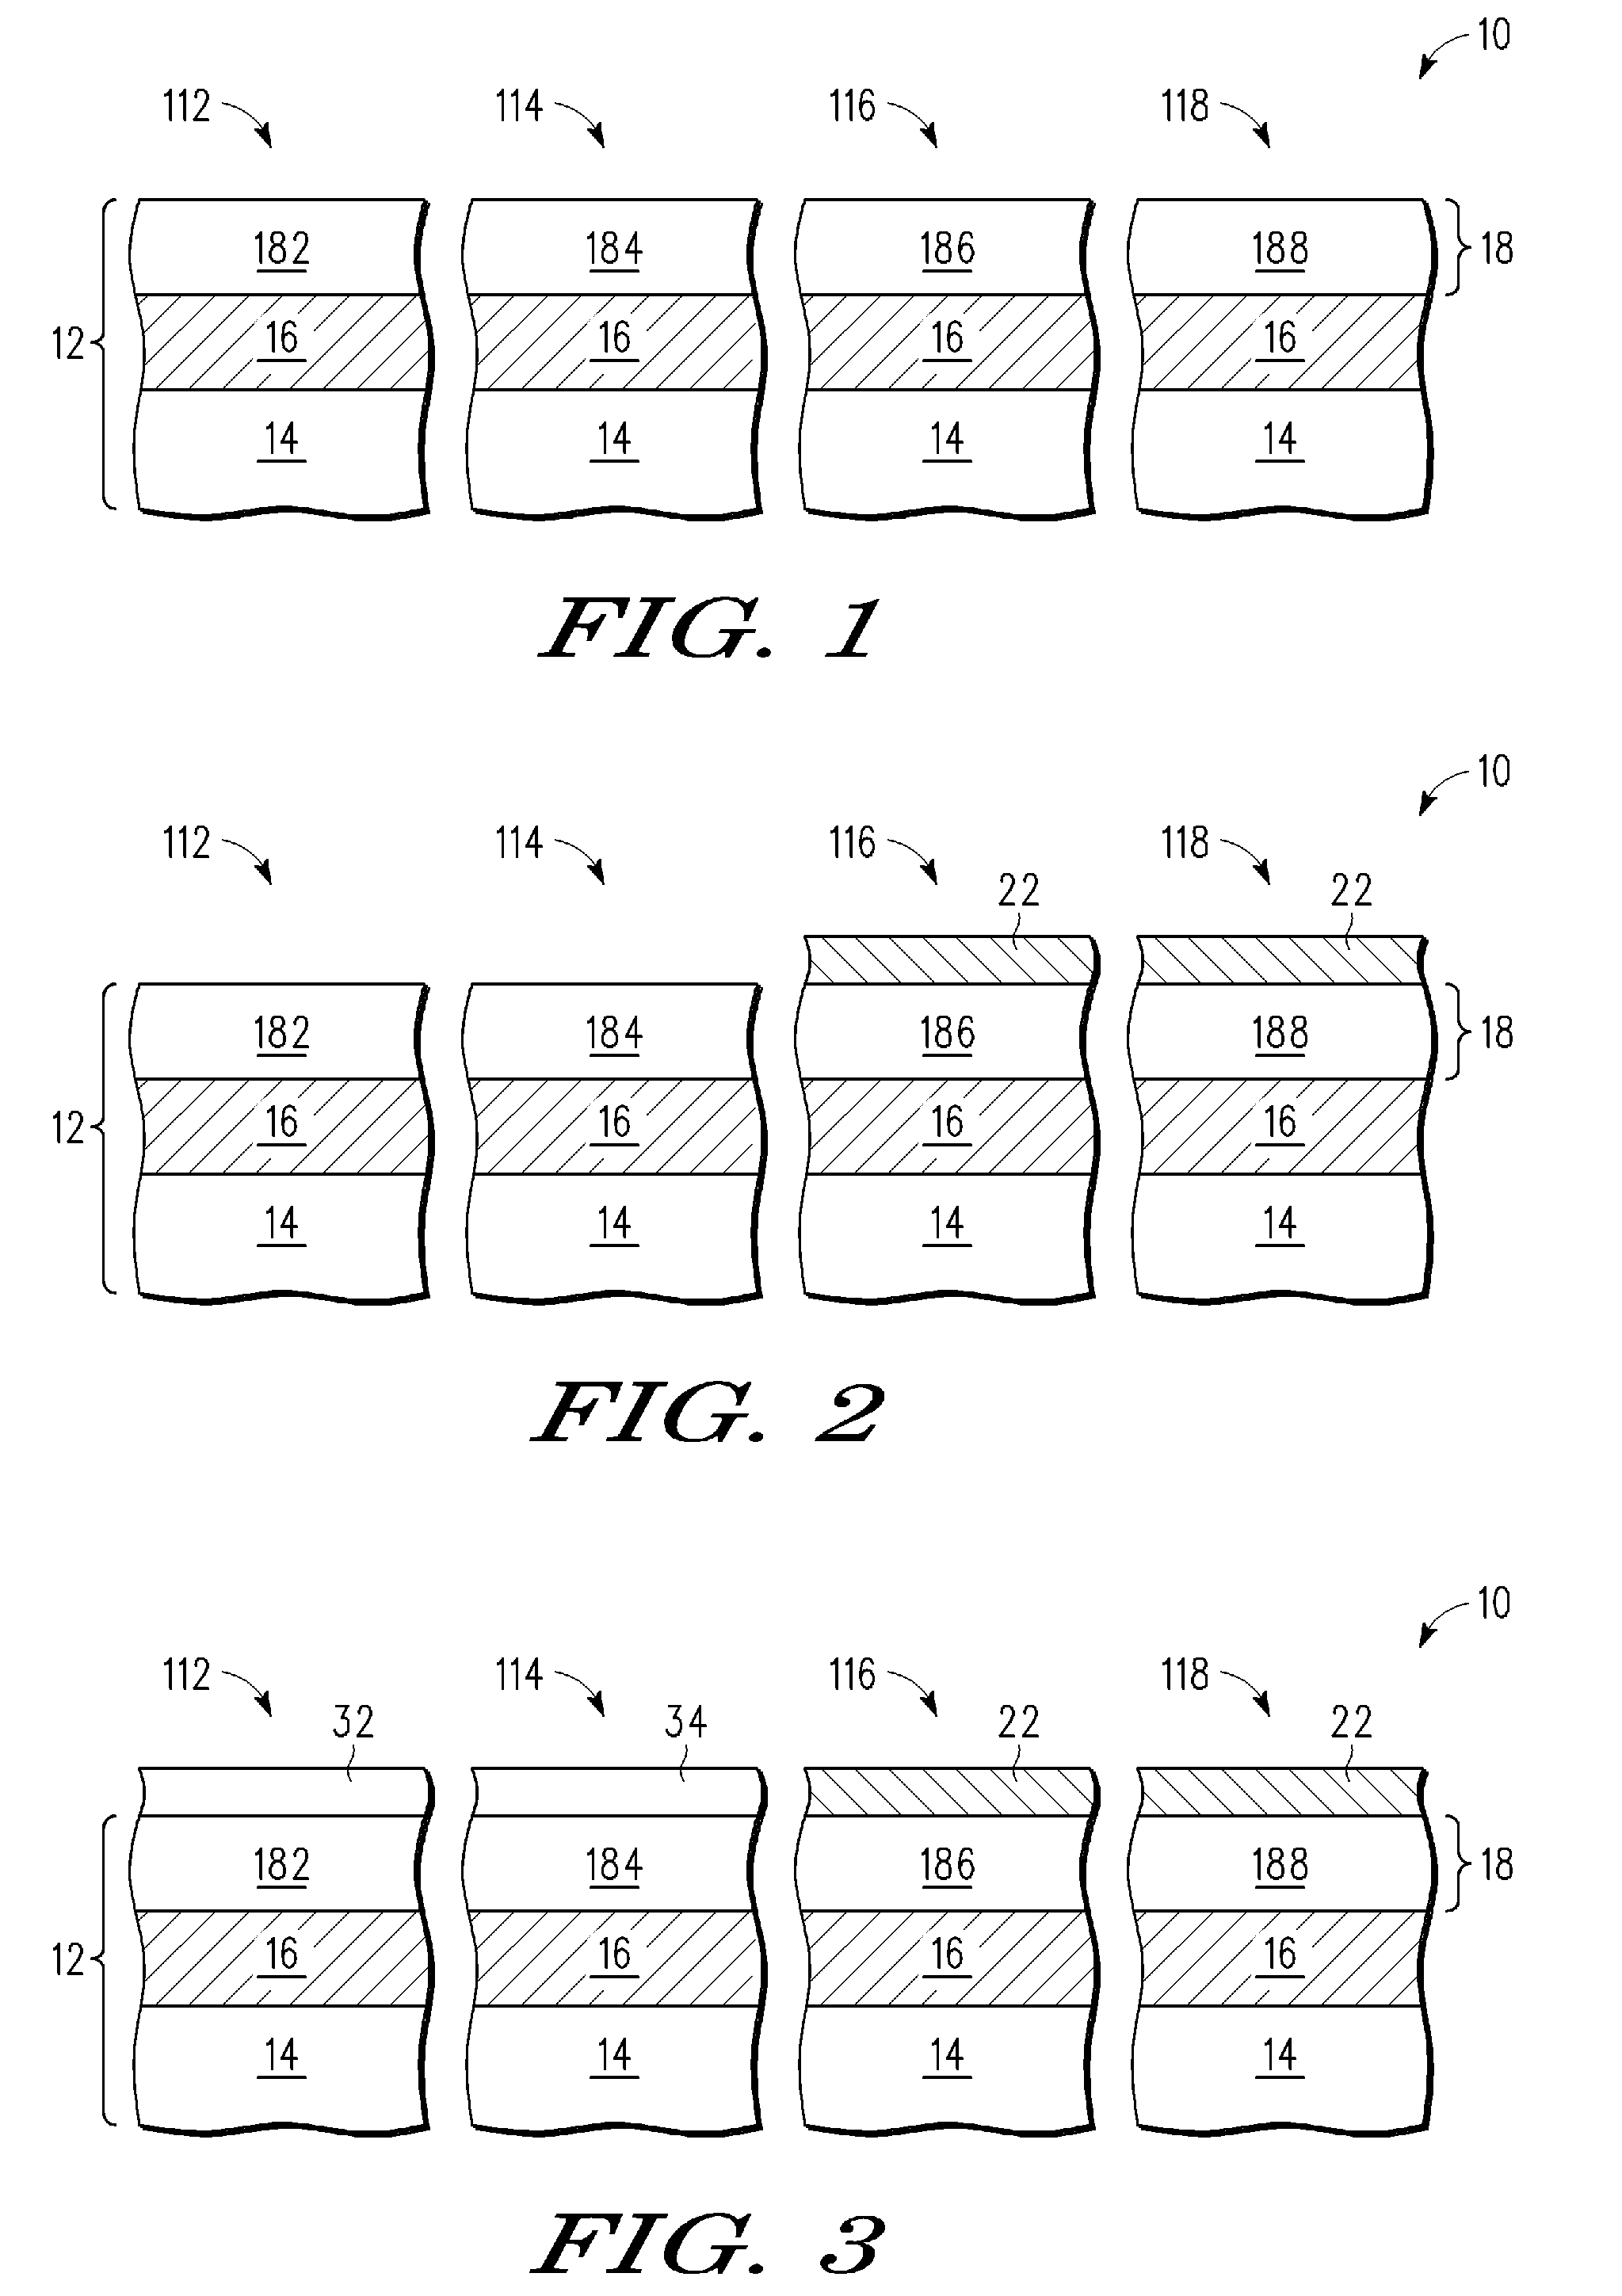 Process for forming an electronic device including a transistor having a metal gate electrode